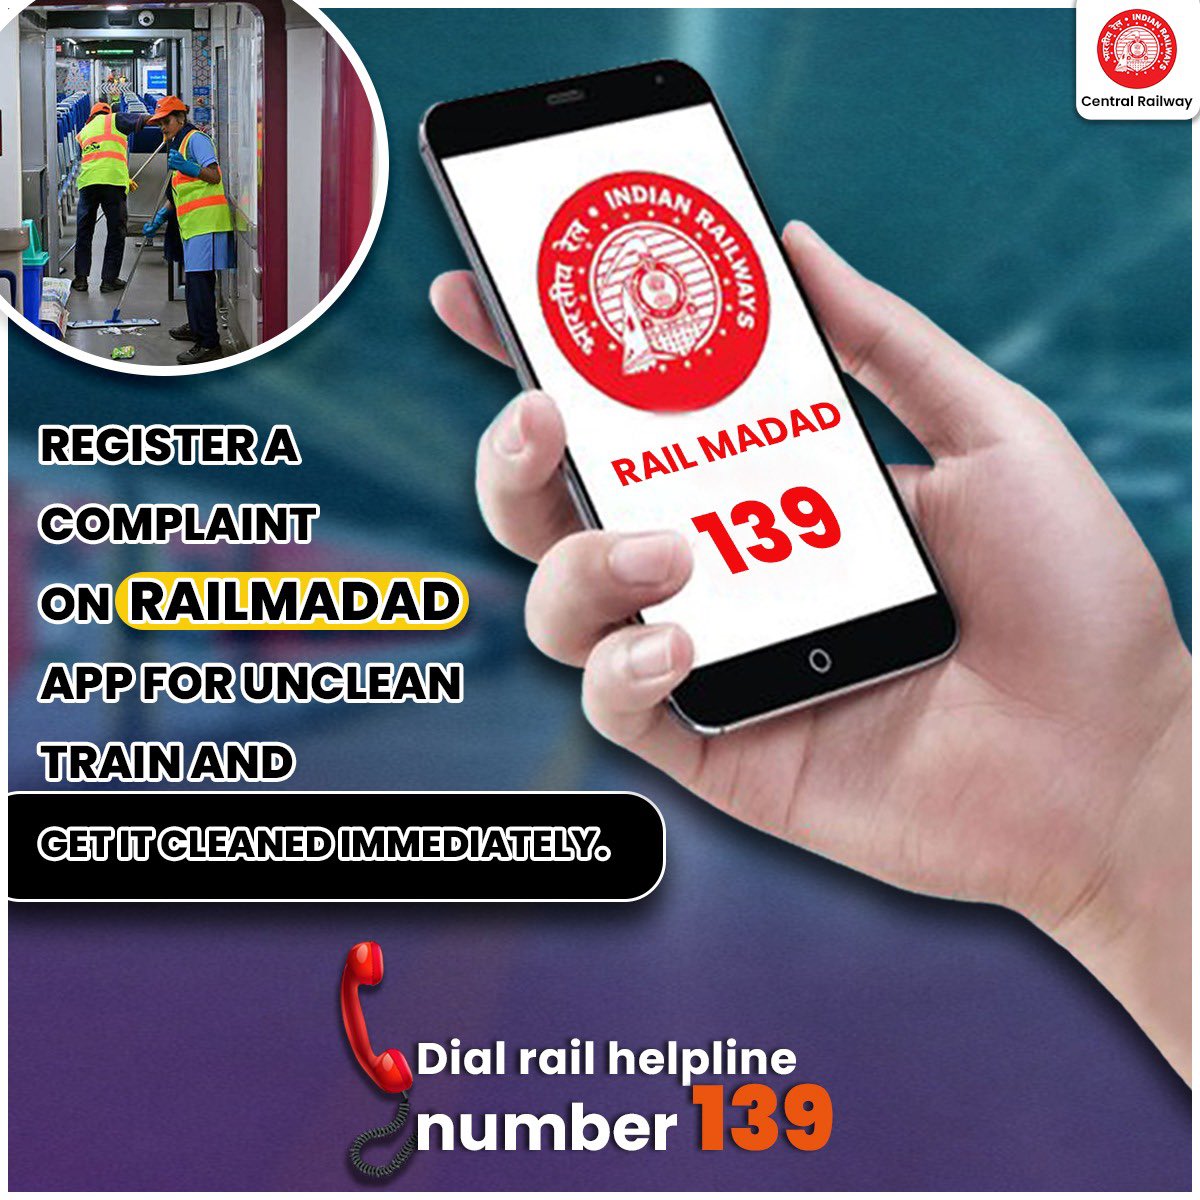 Dial 139 and report unclean trains on the RailMadad app. Let's ensure a clean & hygienic journey for all. You can also use the app to report any other issues during your journey. 📱🚯
#CentralRailway #RailMadad